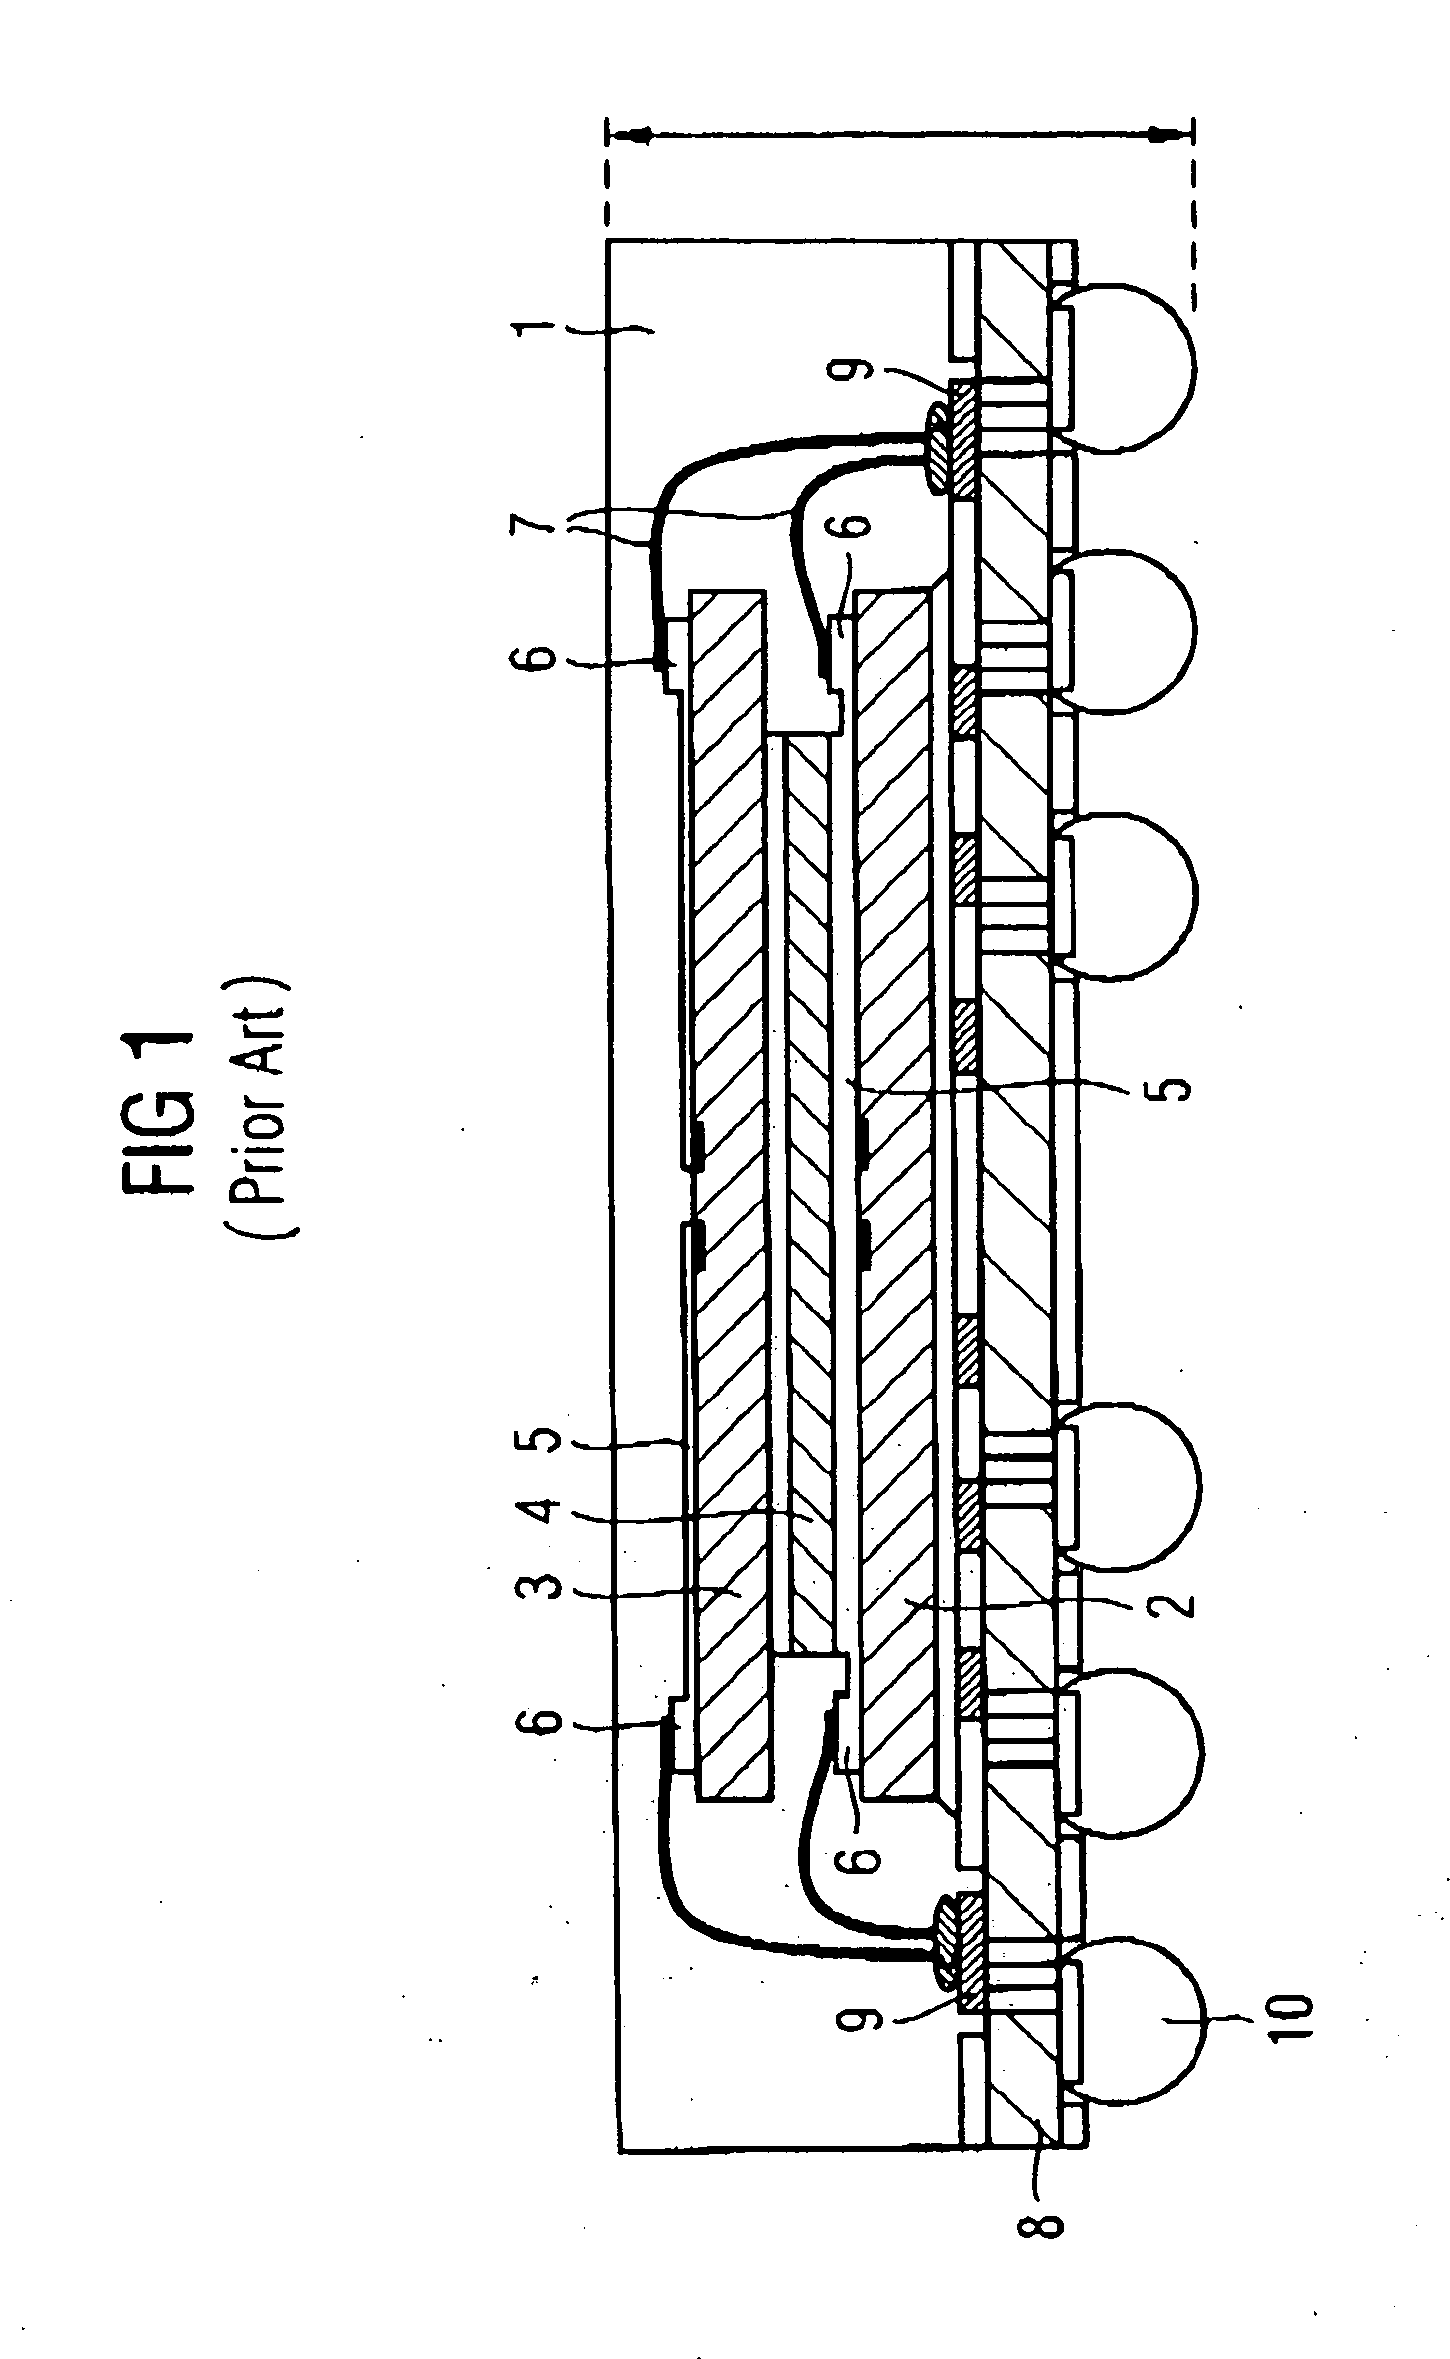 Multi-chip device and method for producing a multi-chip device